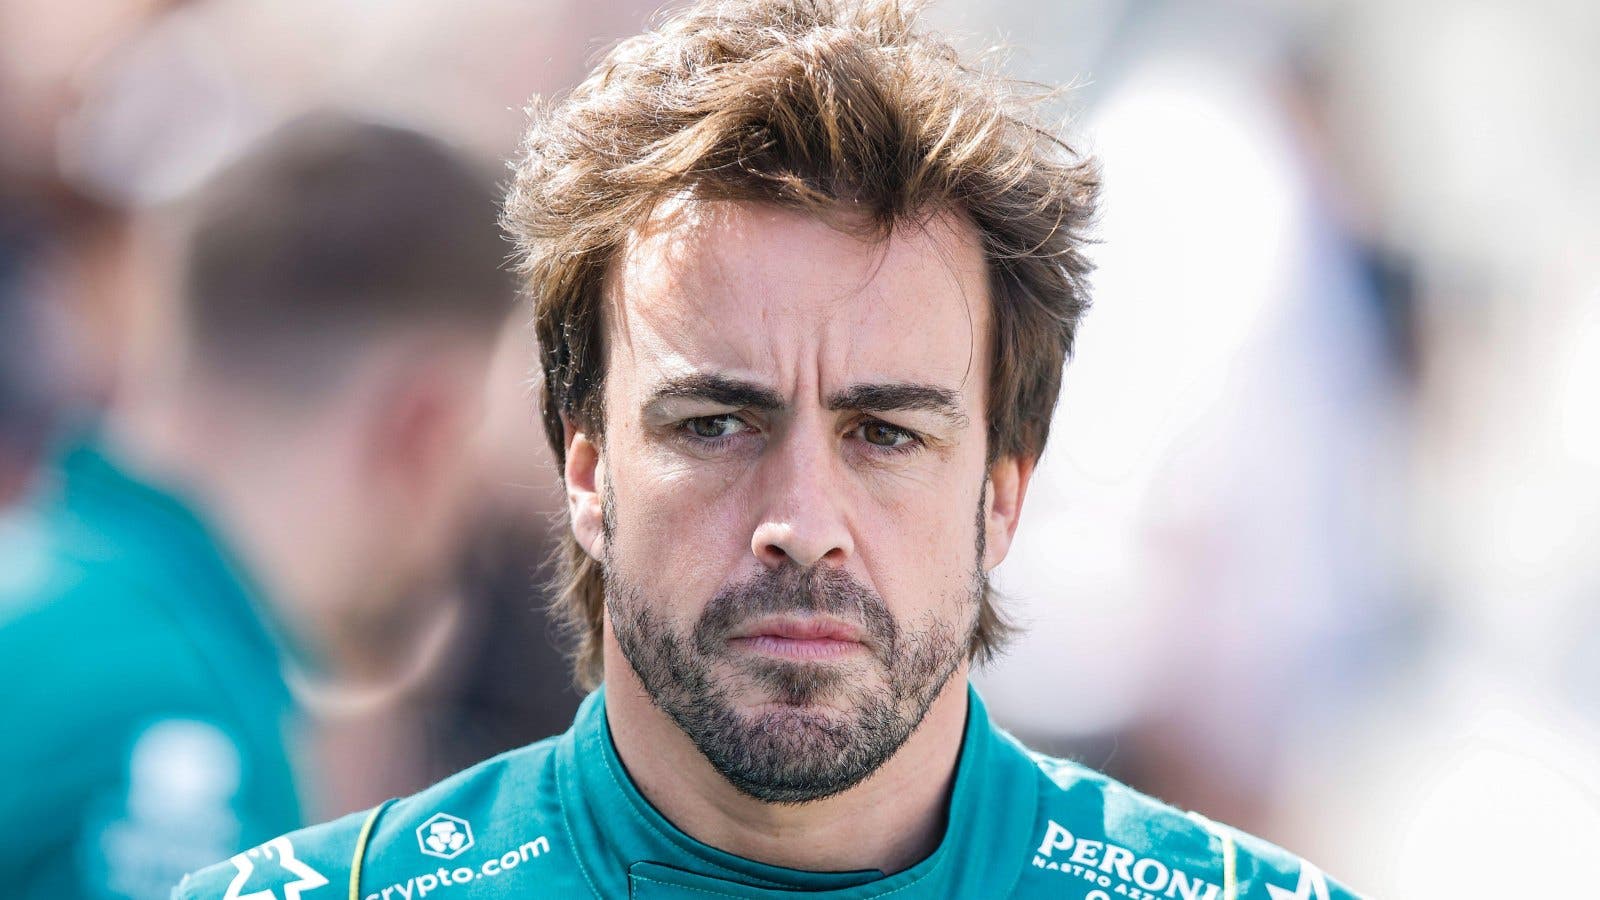 Another change at Aston Martin: Fernando Alonso gets fed up
